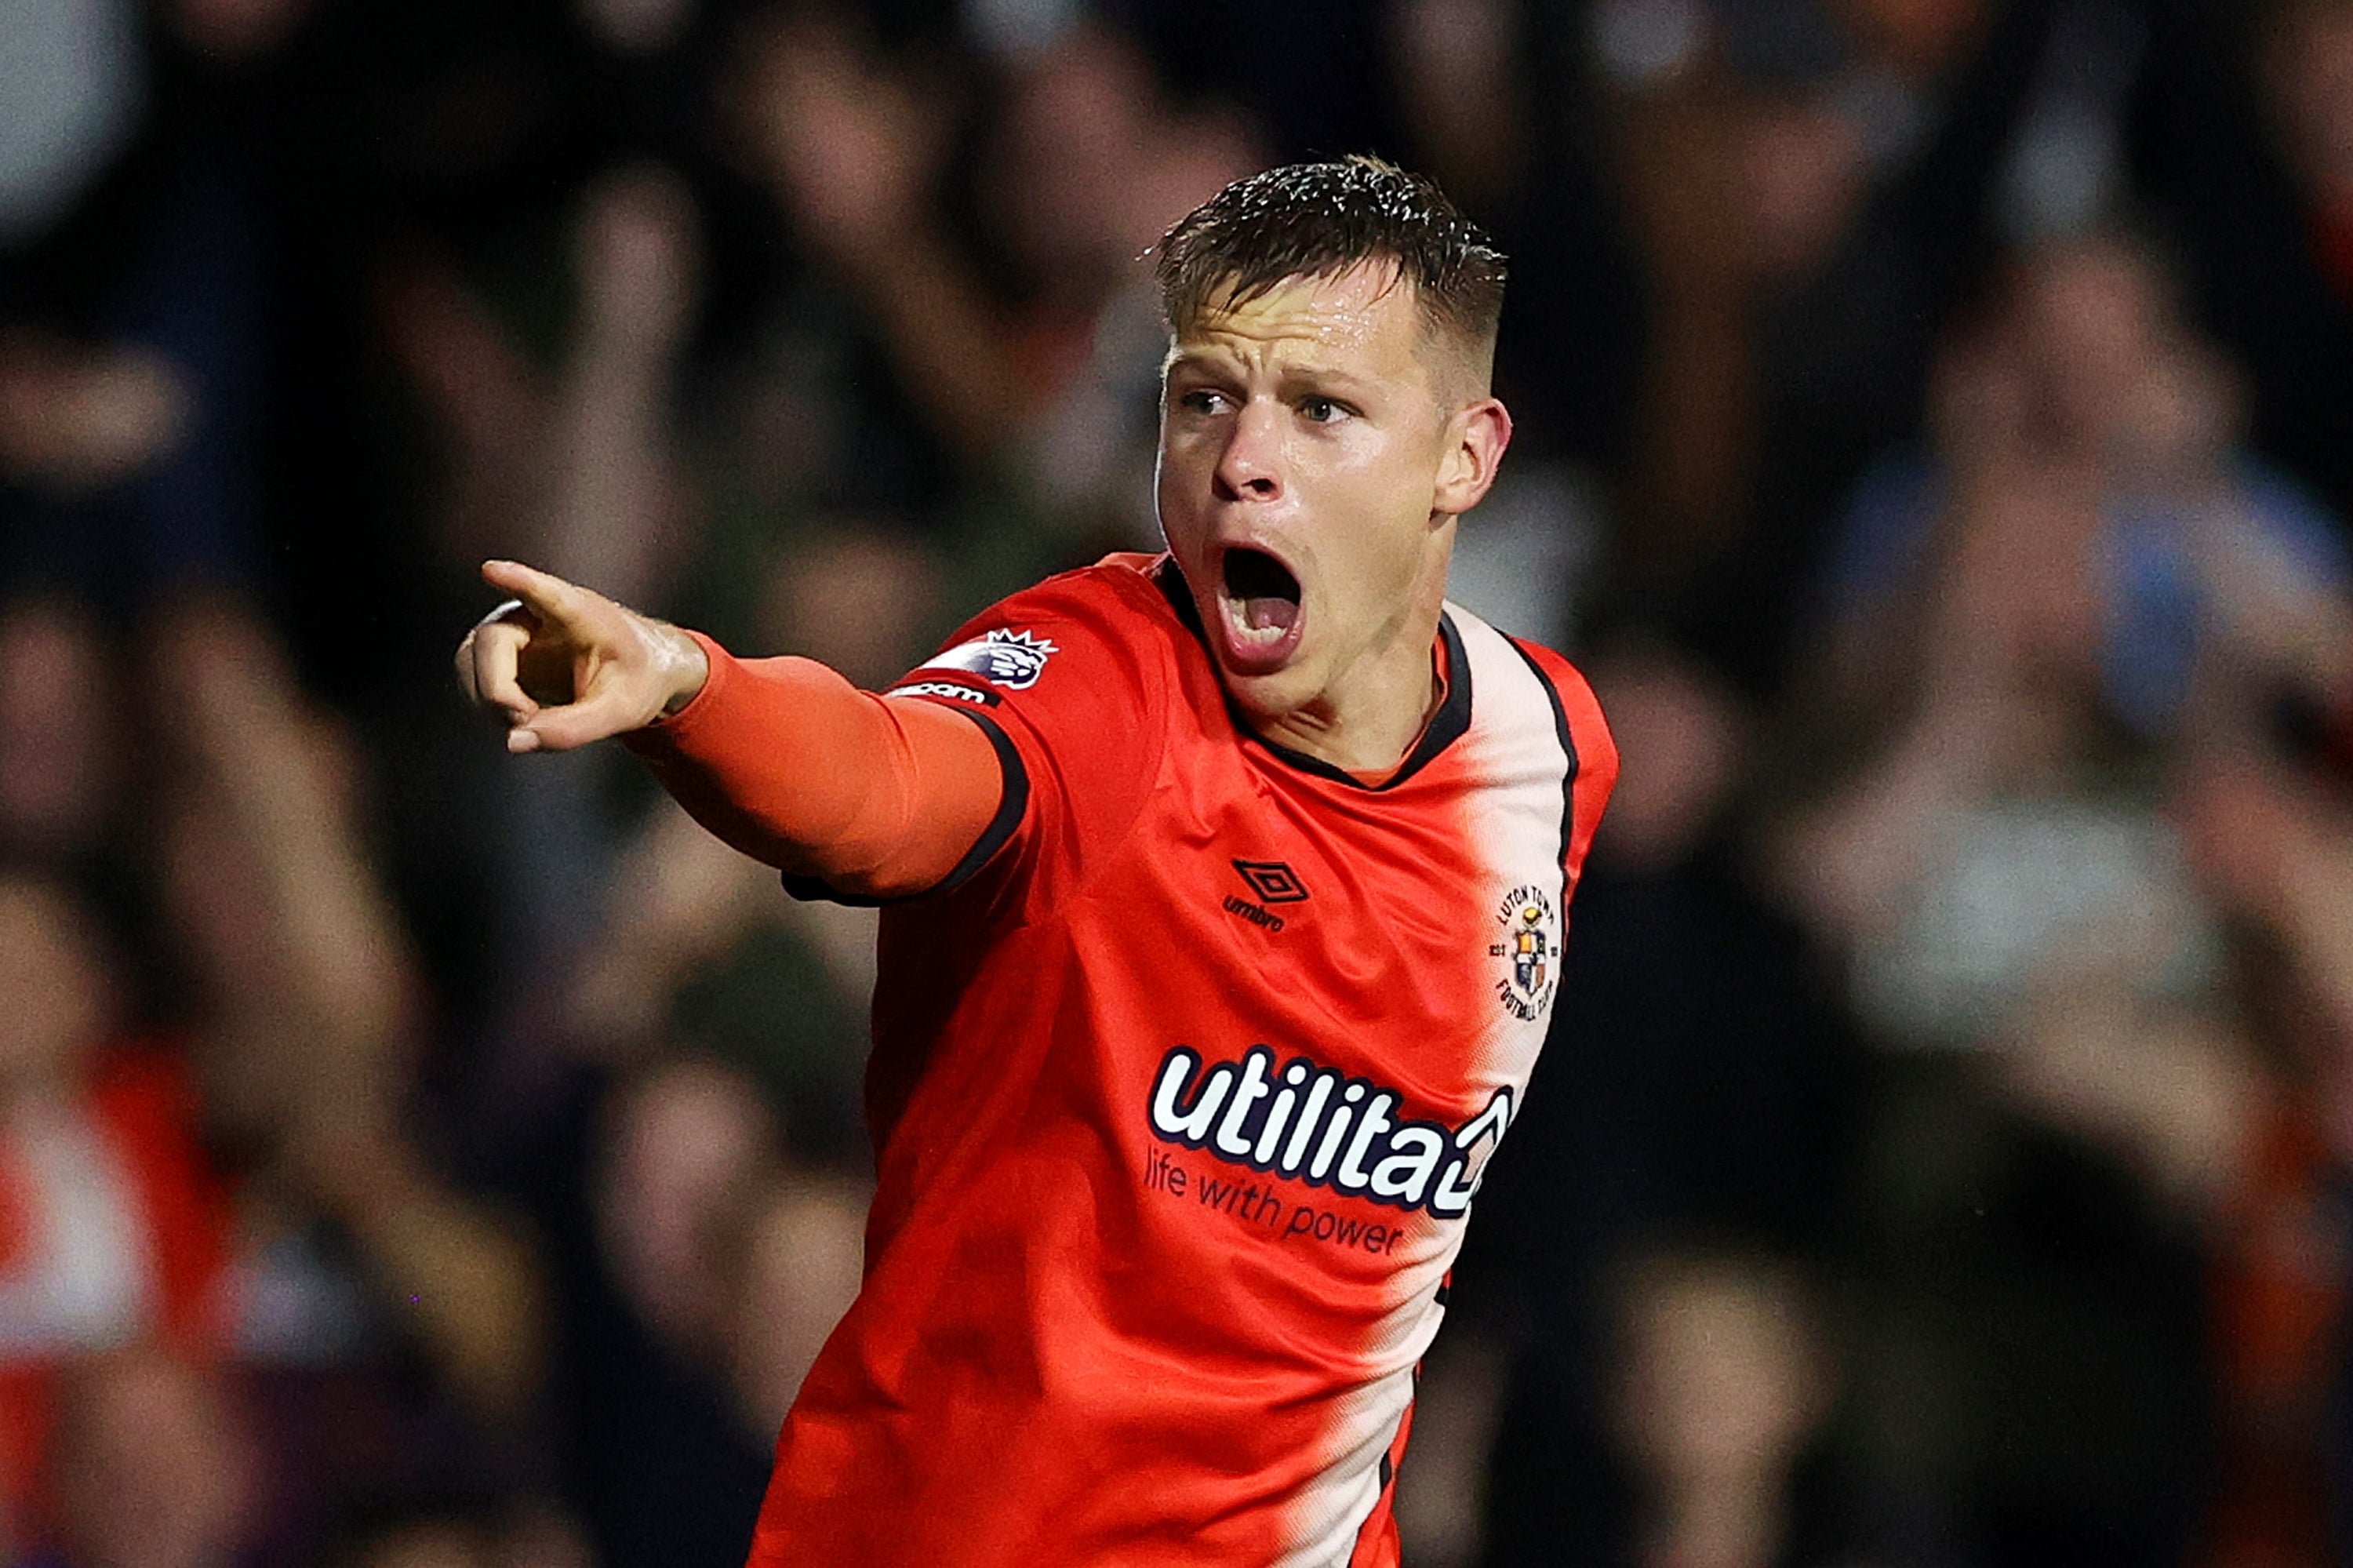 Mads Andersen pulled a late goal back for Luton but it wasn’t enough